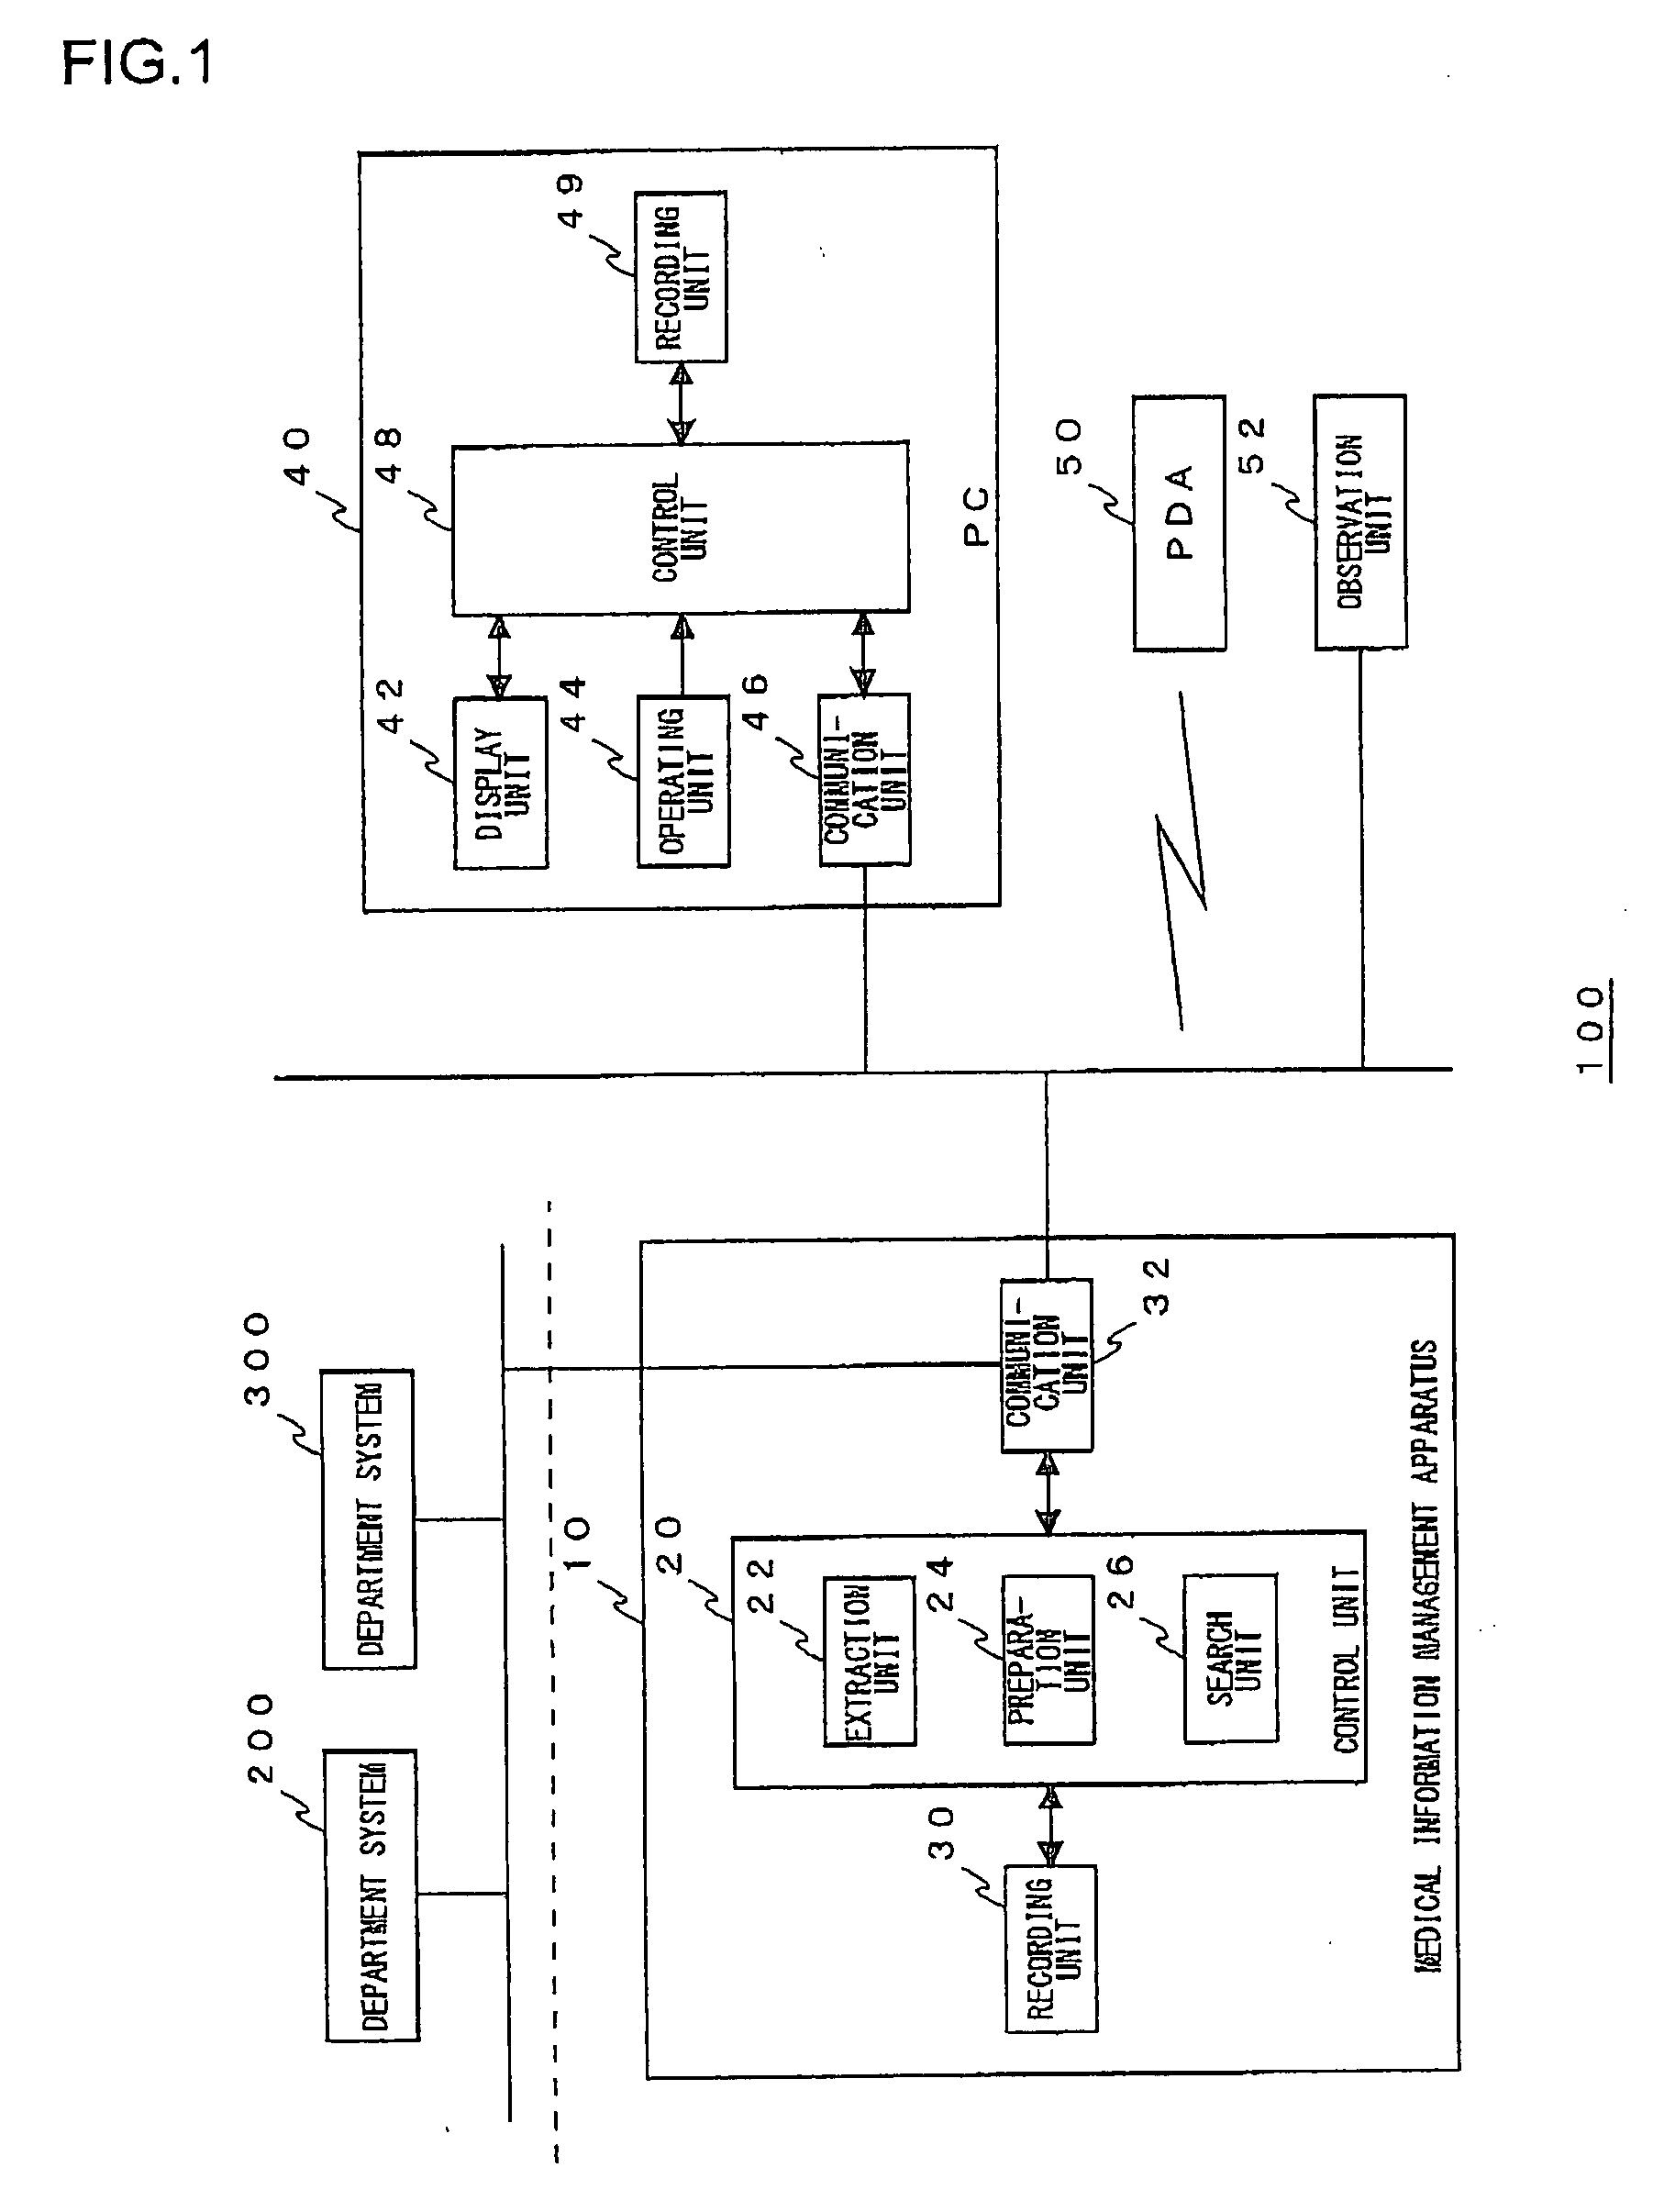 Medical information management apparatus for managing interview sheet data